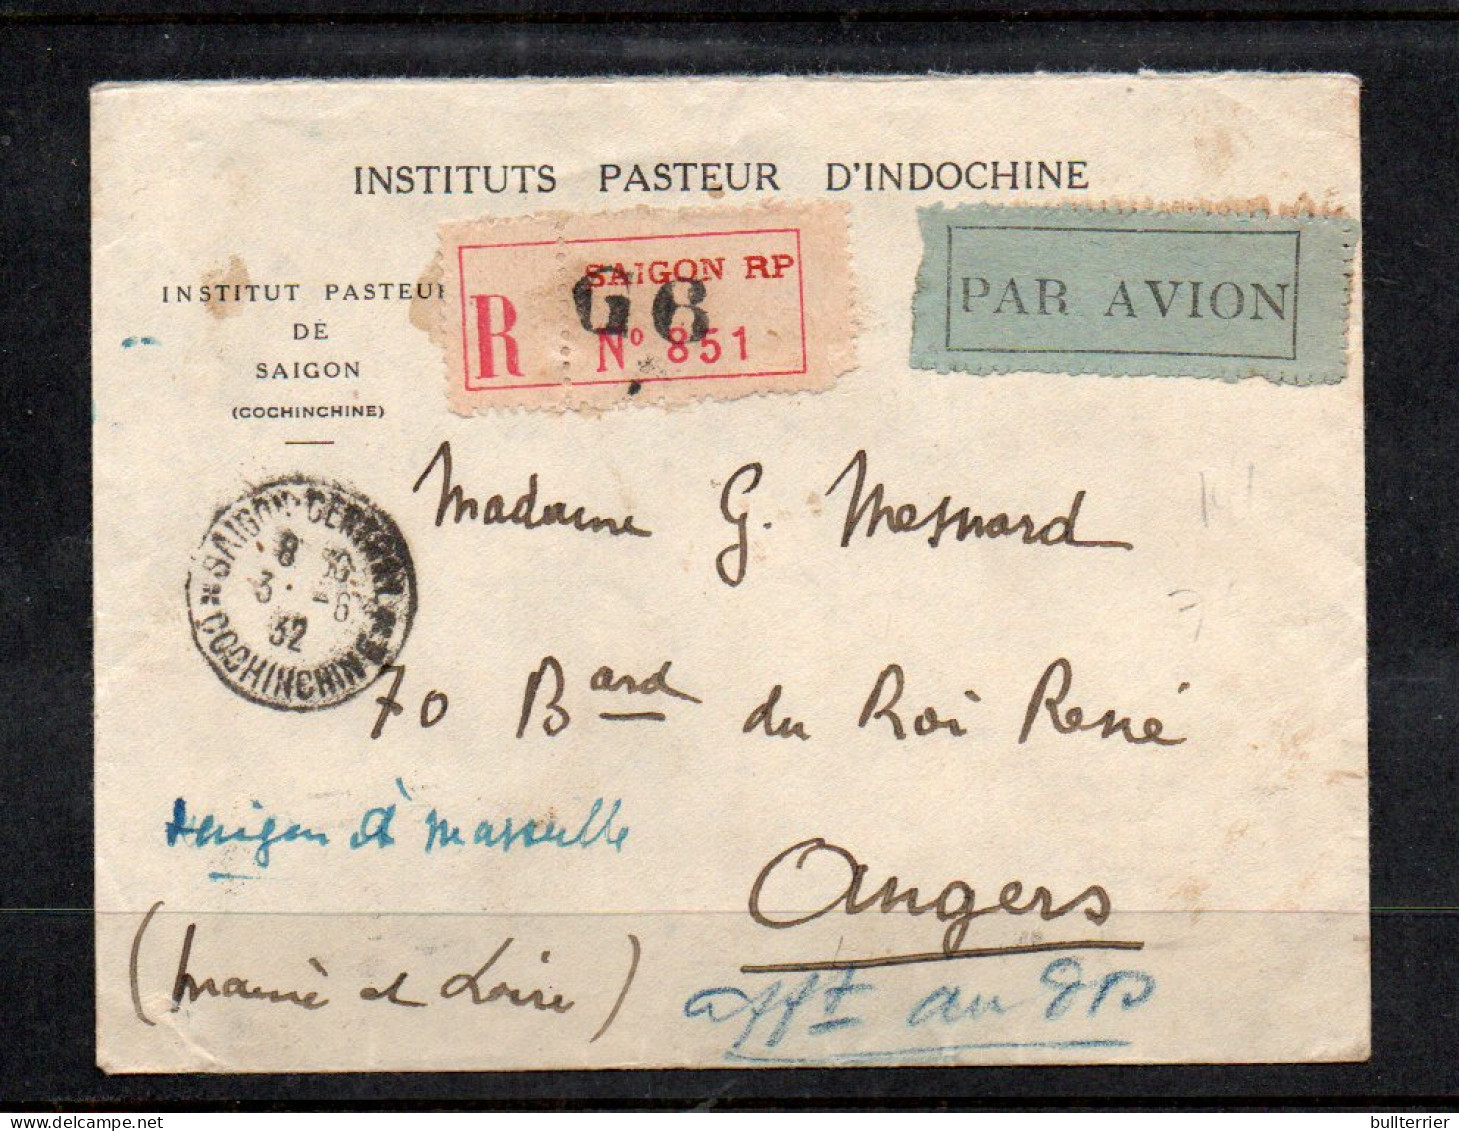 INDO CHINA - 1932 AIR ORIENT REG COVER FROM PASTUER INSTITUE SIAGON TO ANGERS FRANCE  - Airmail